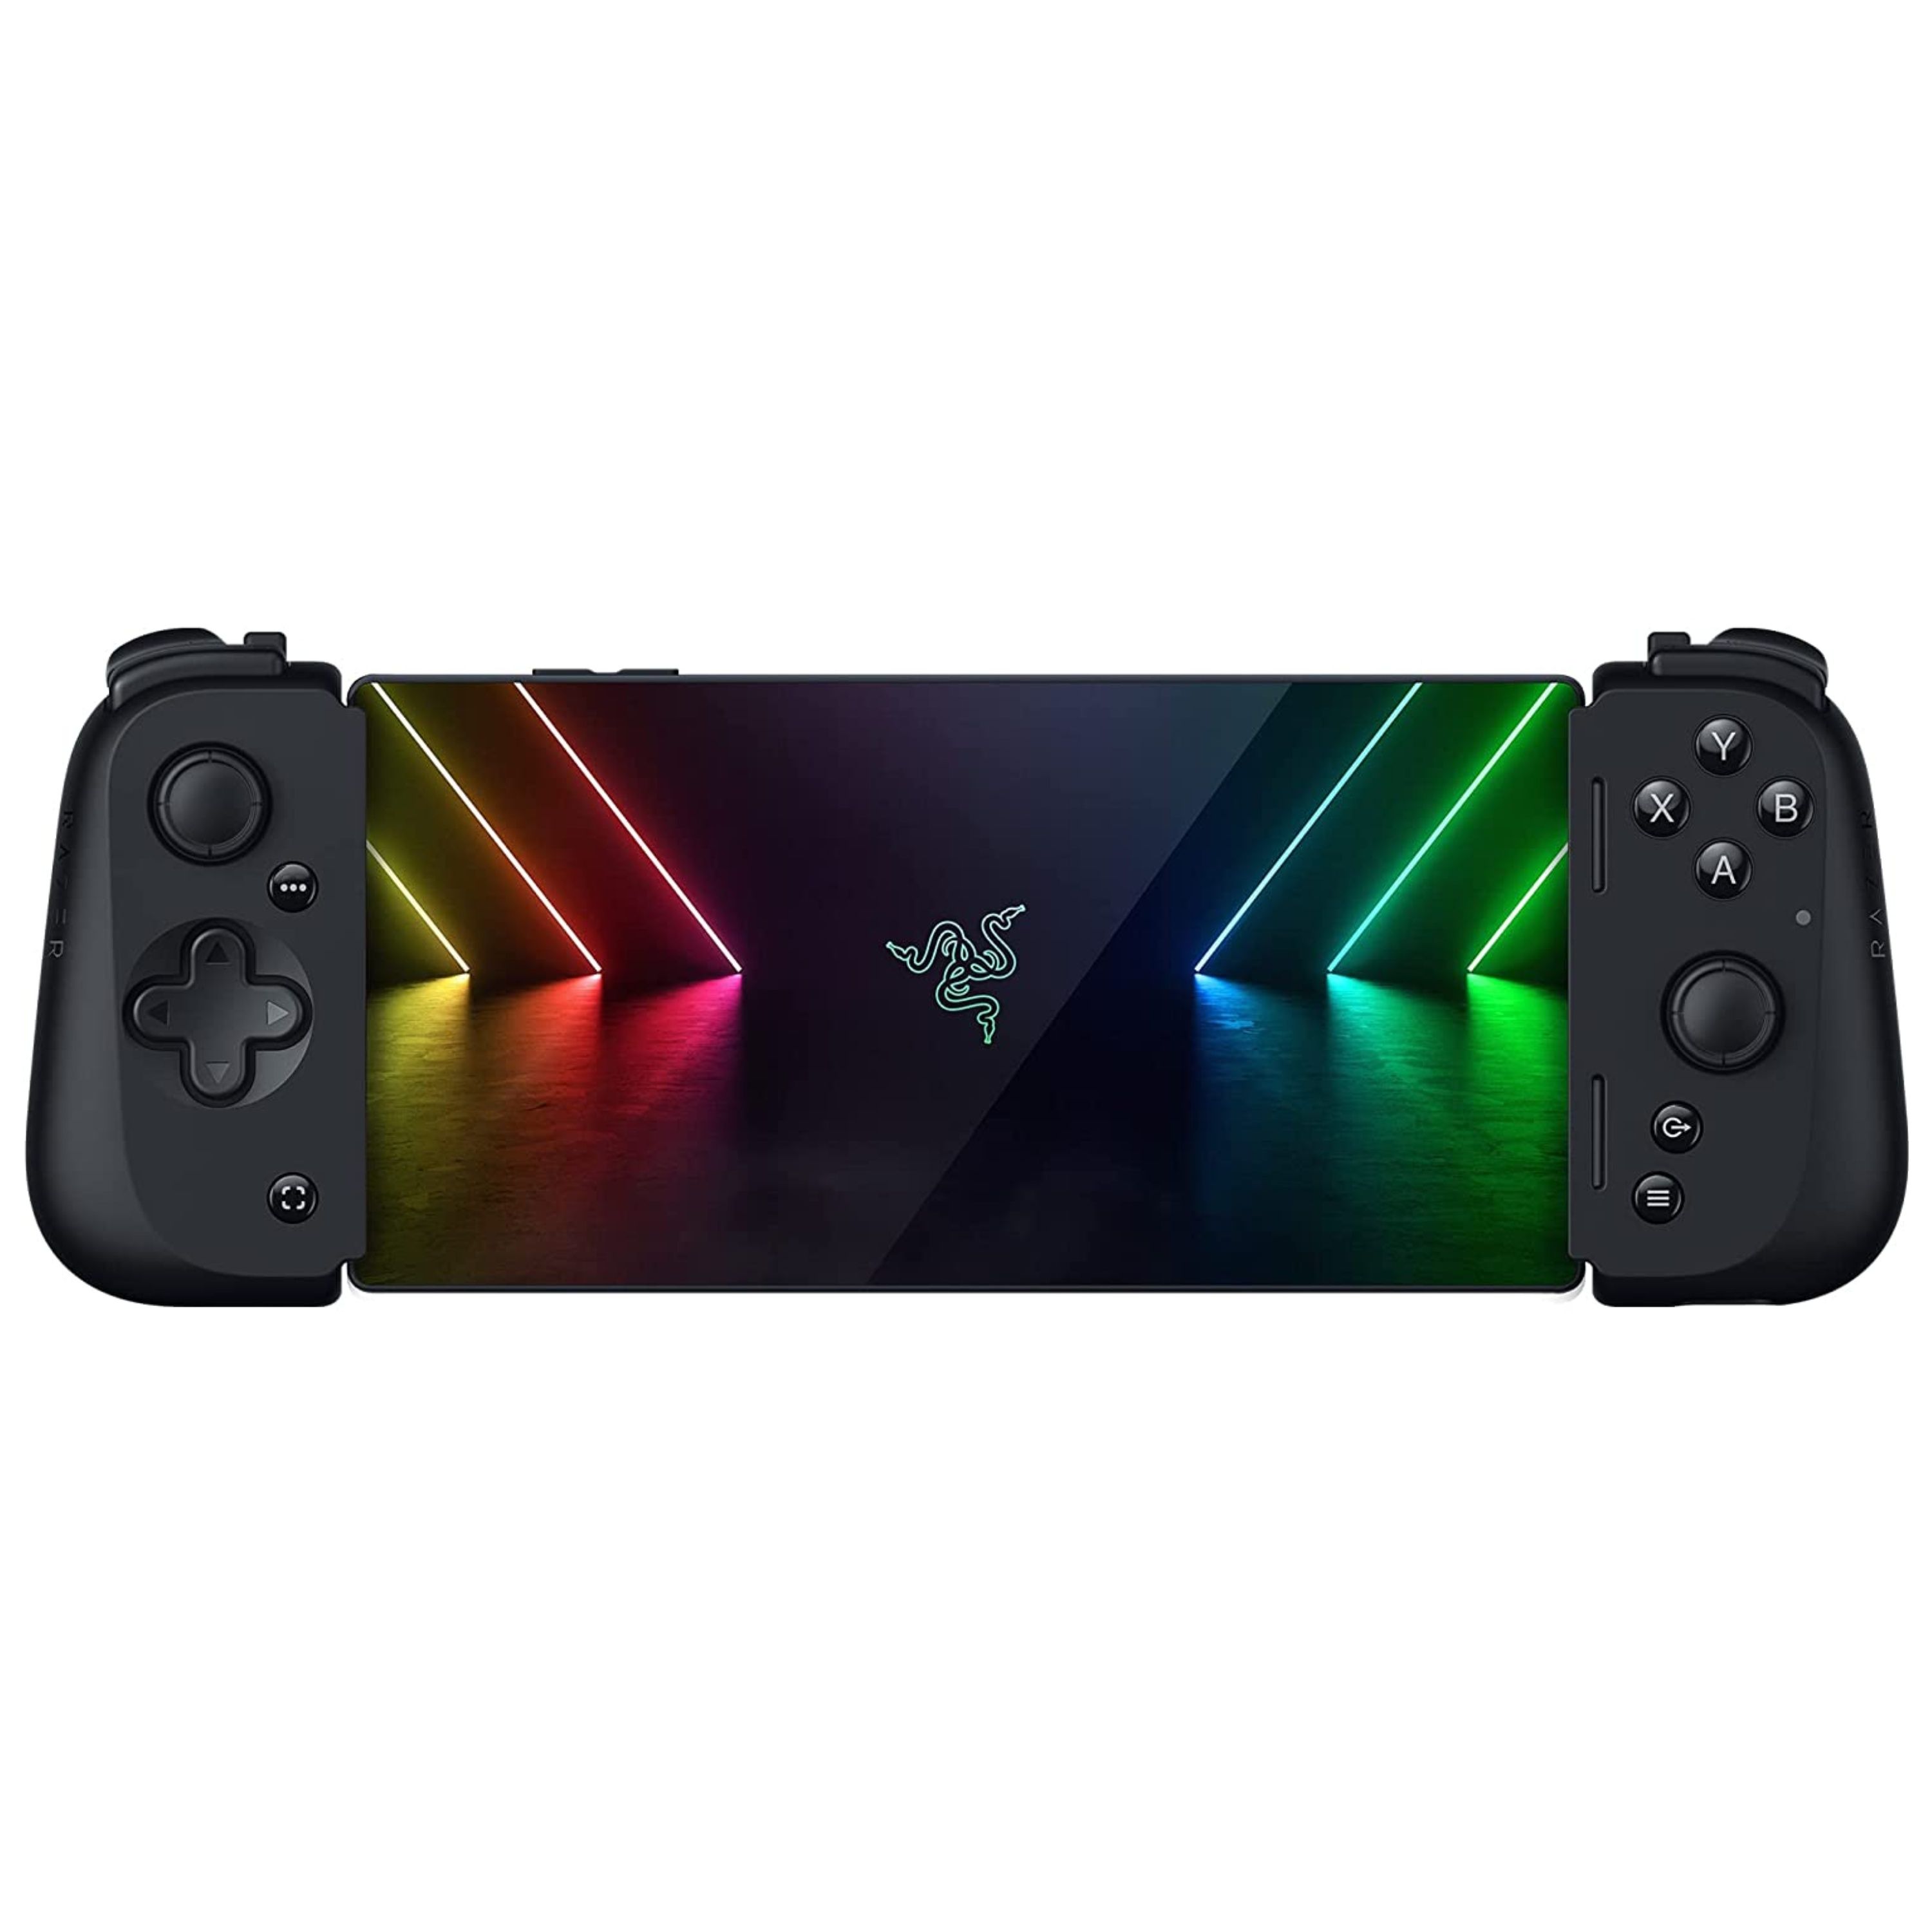 Razer Kishi V2 Pro Controller For Android Arrives With Xbox Variant